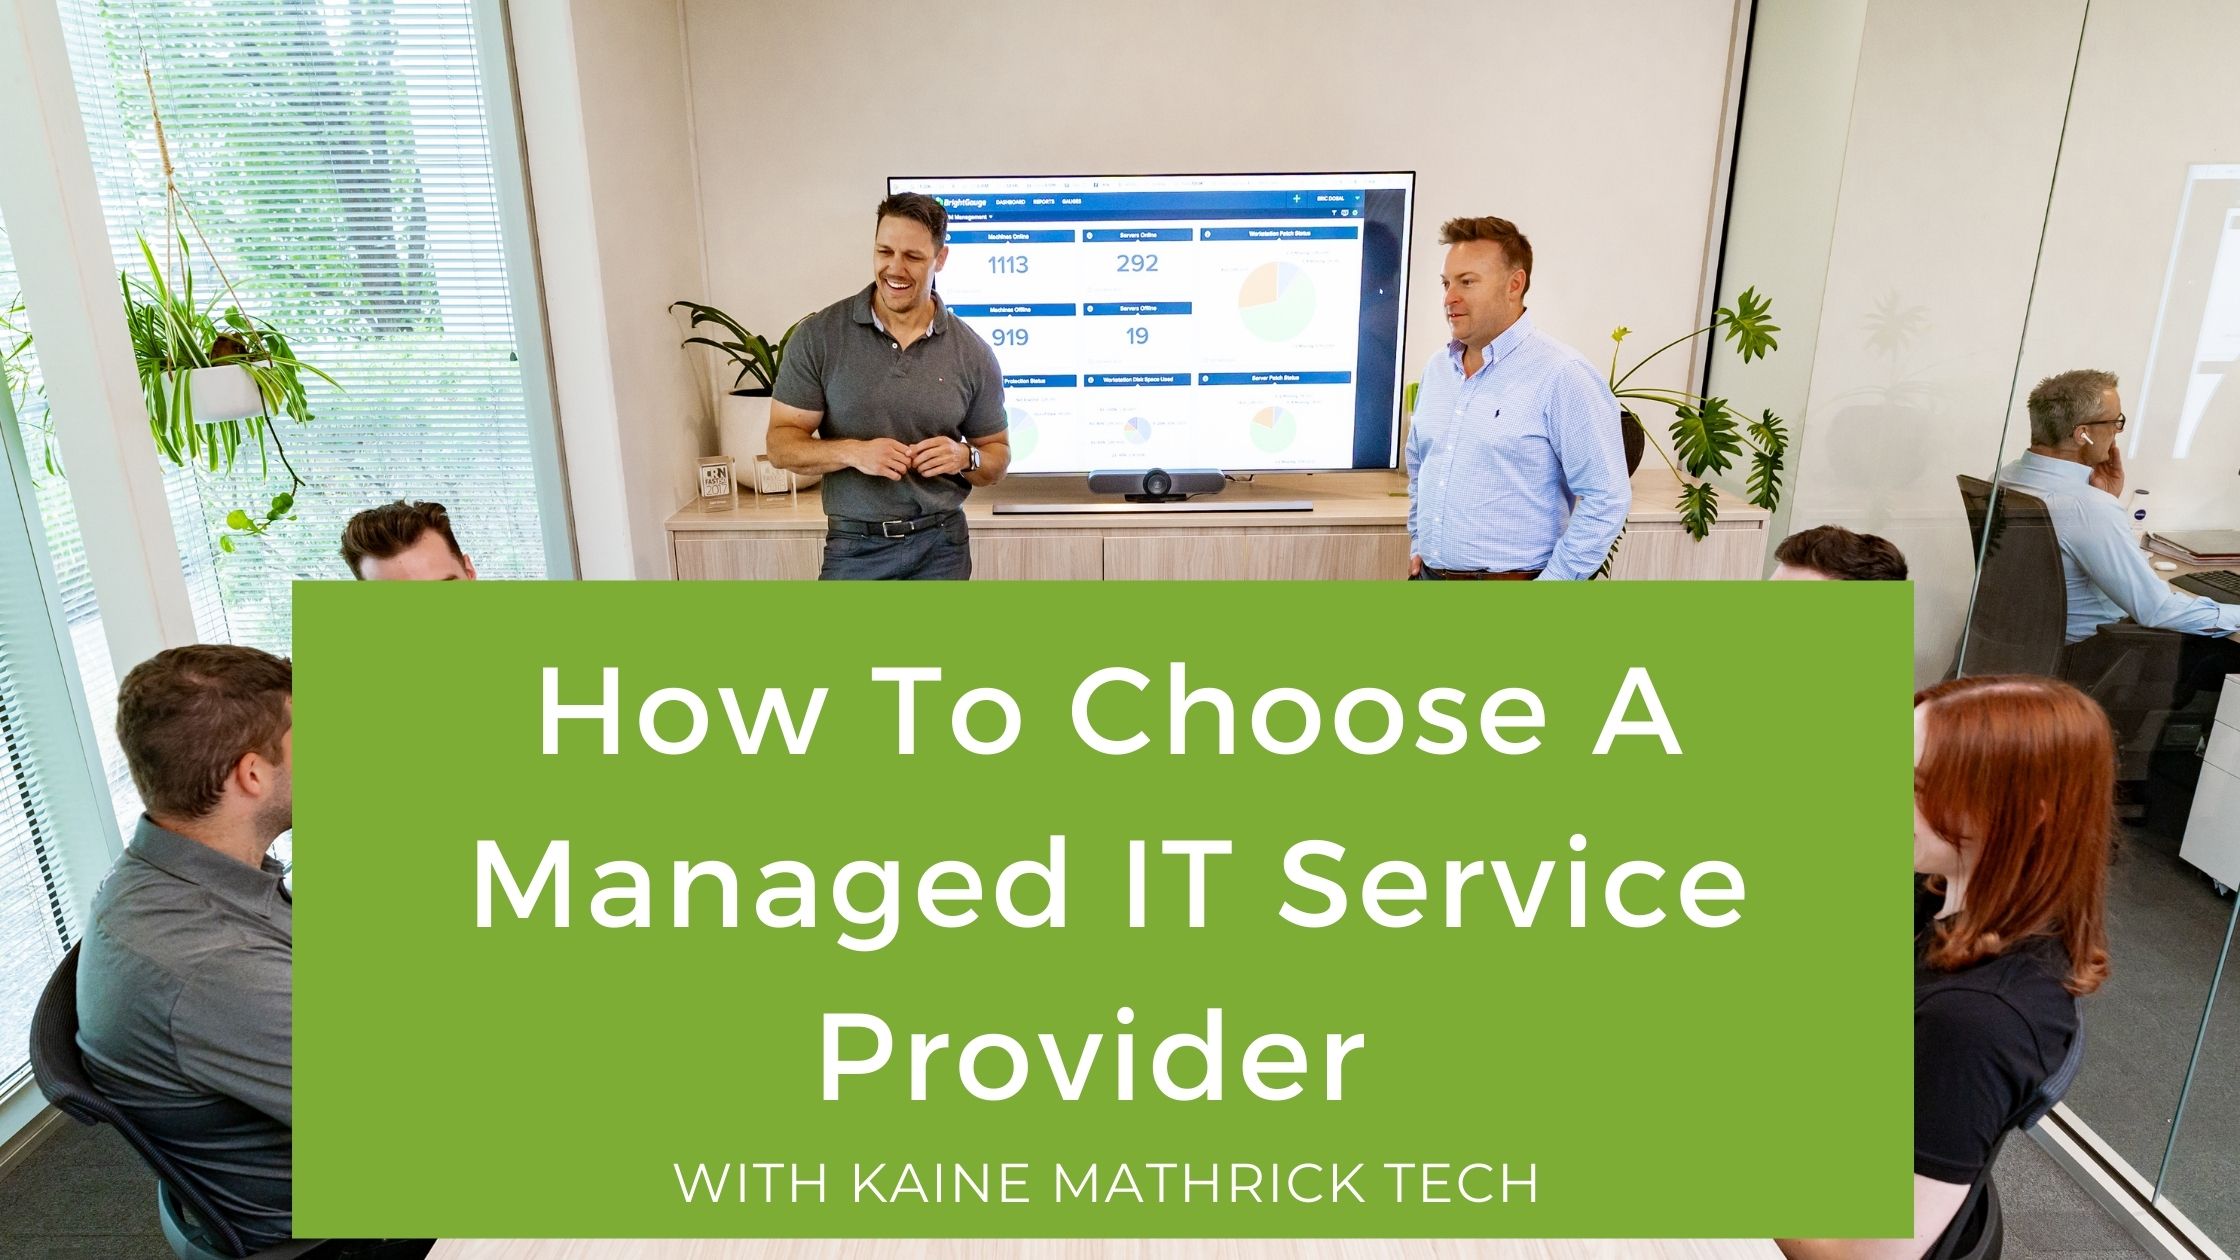 How To Choose A Managed IT Services Provider